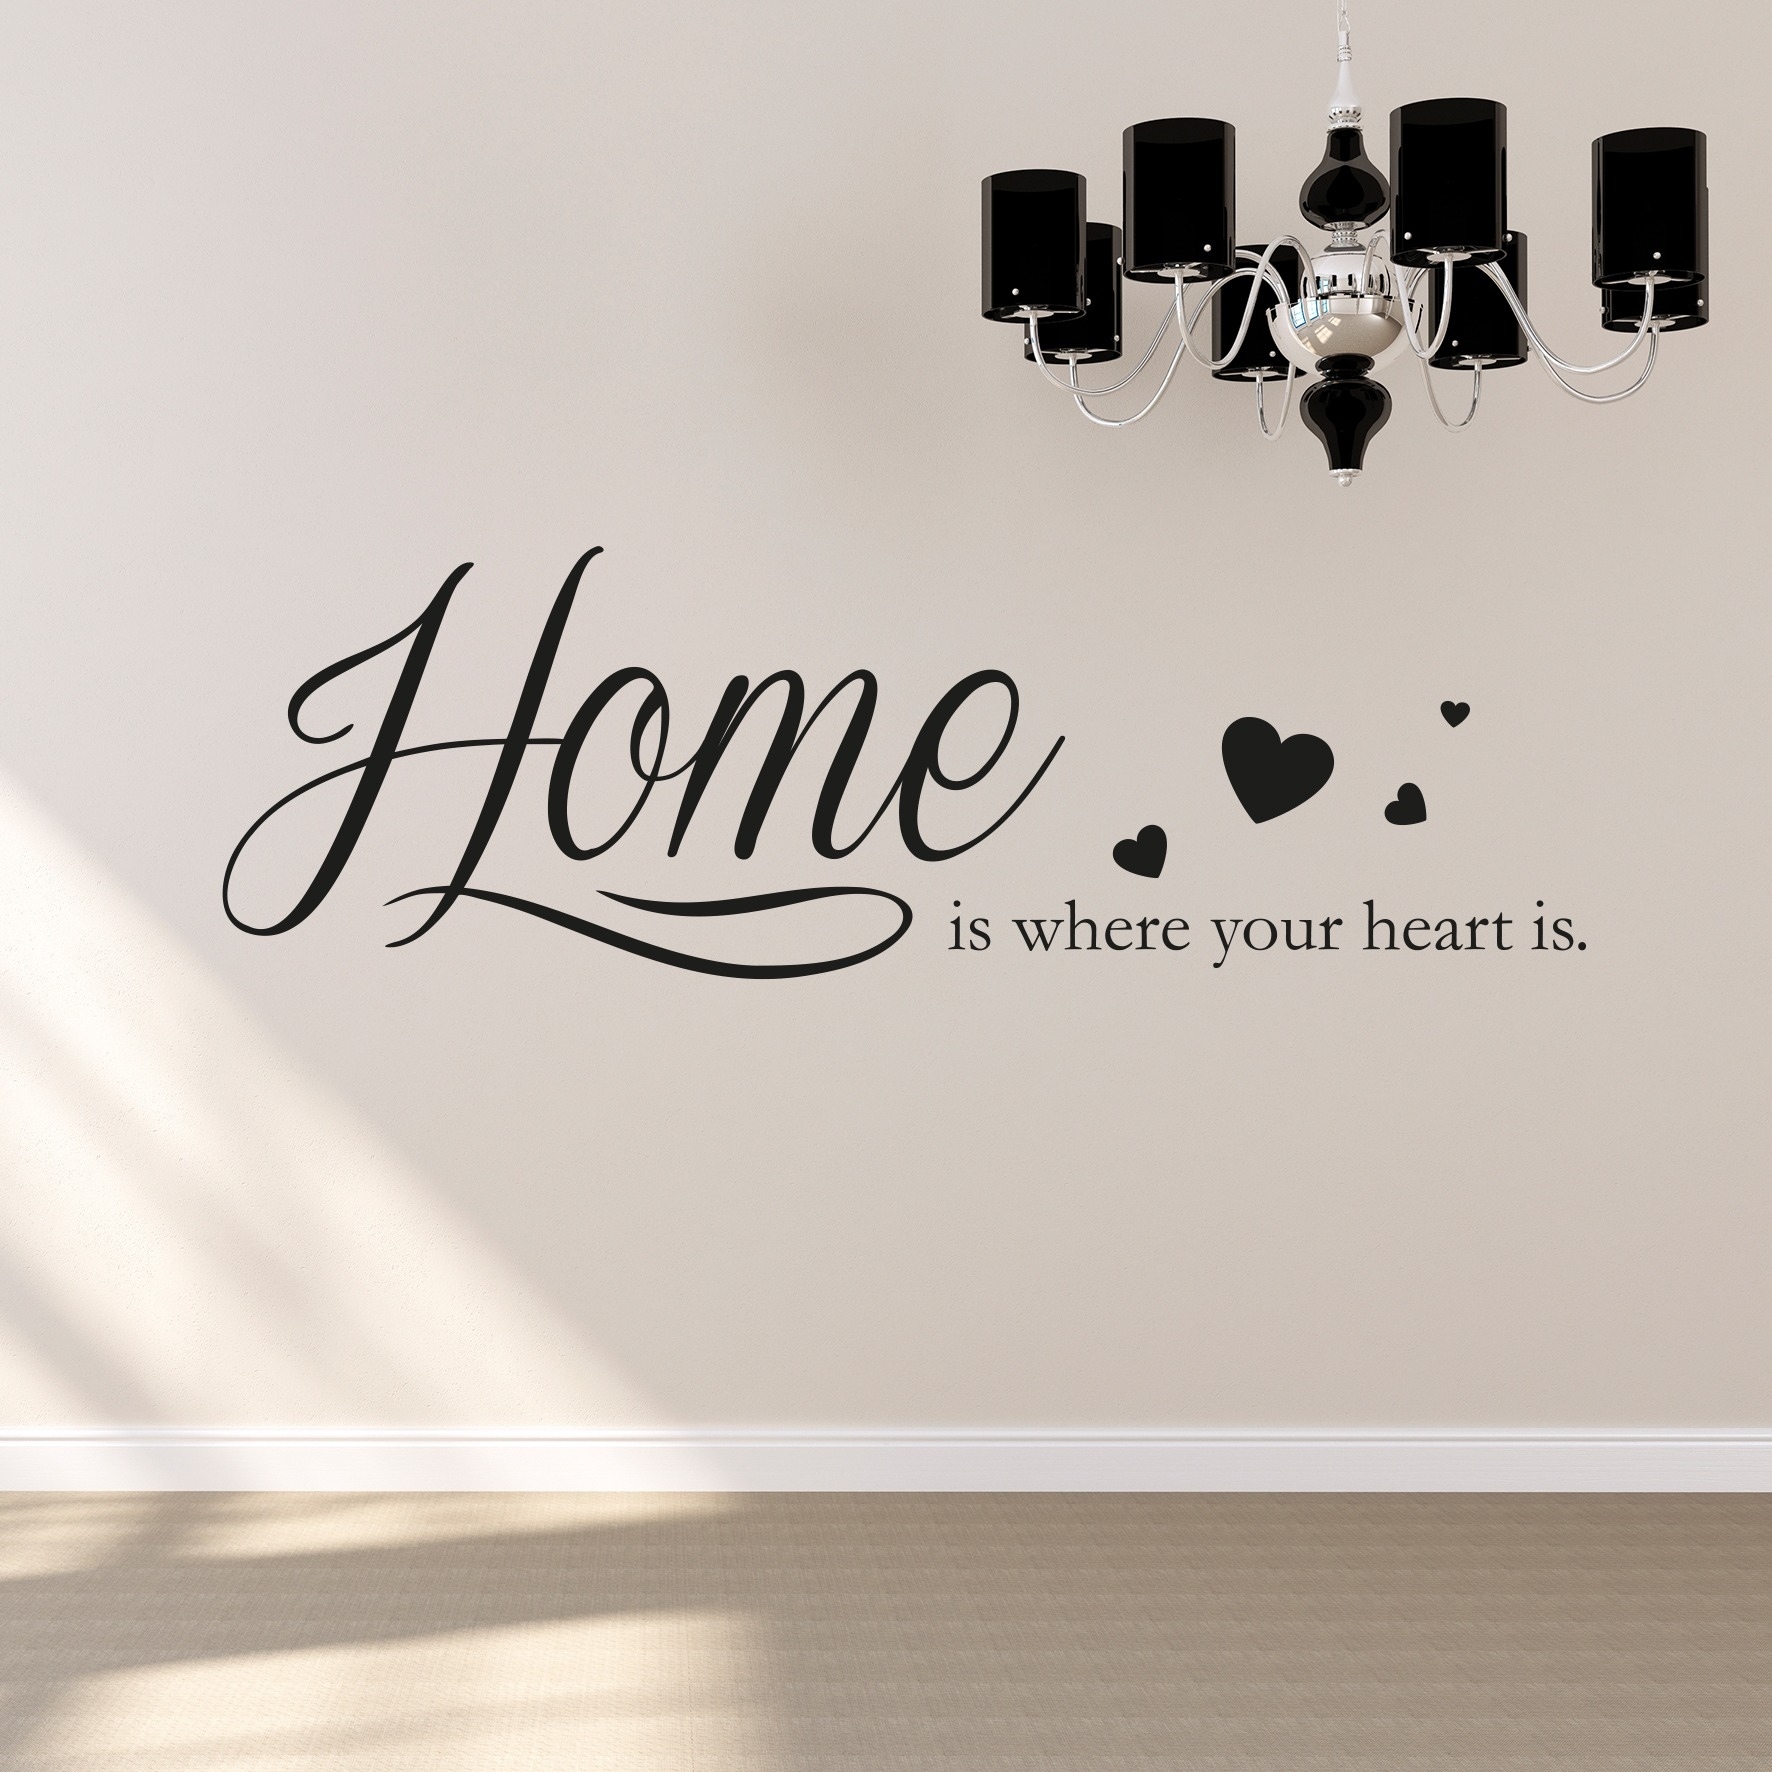 queence Wandtattoo »Home is where your heart is«, 120 x 30 cm